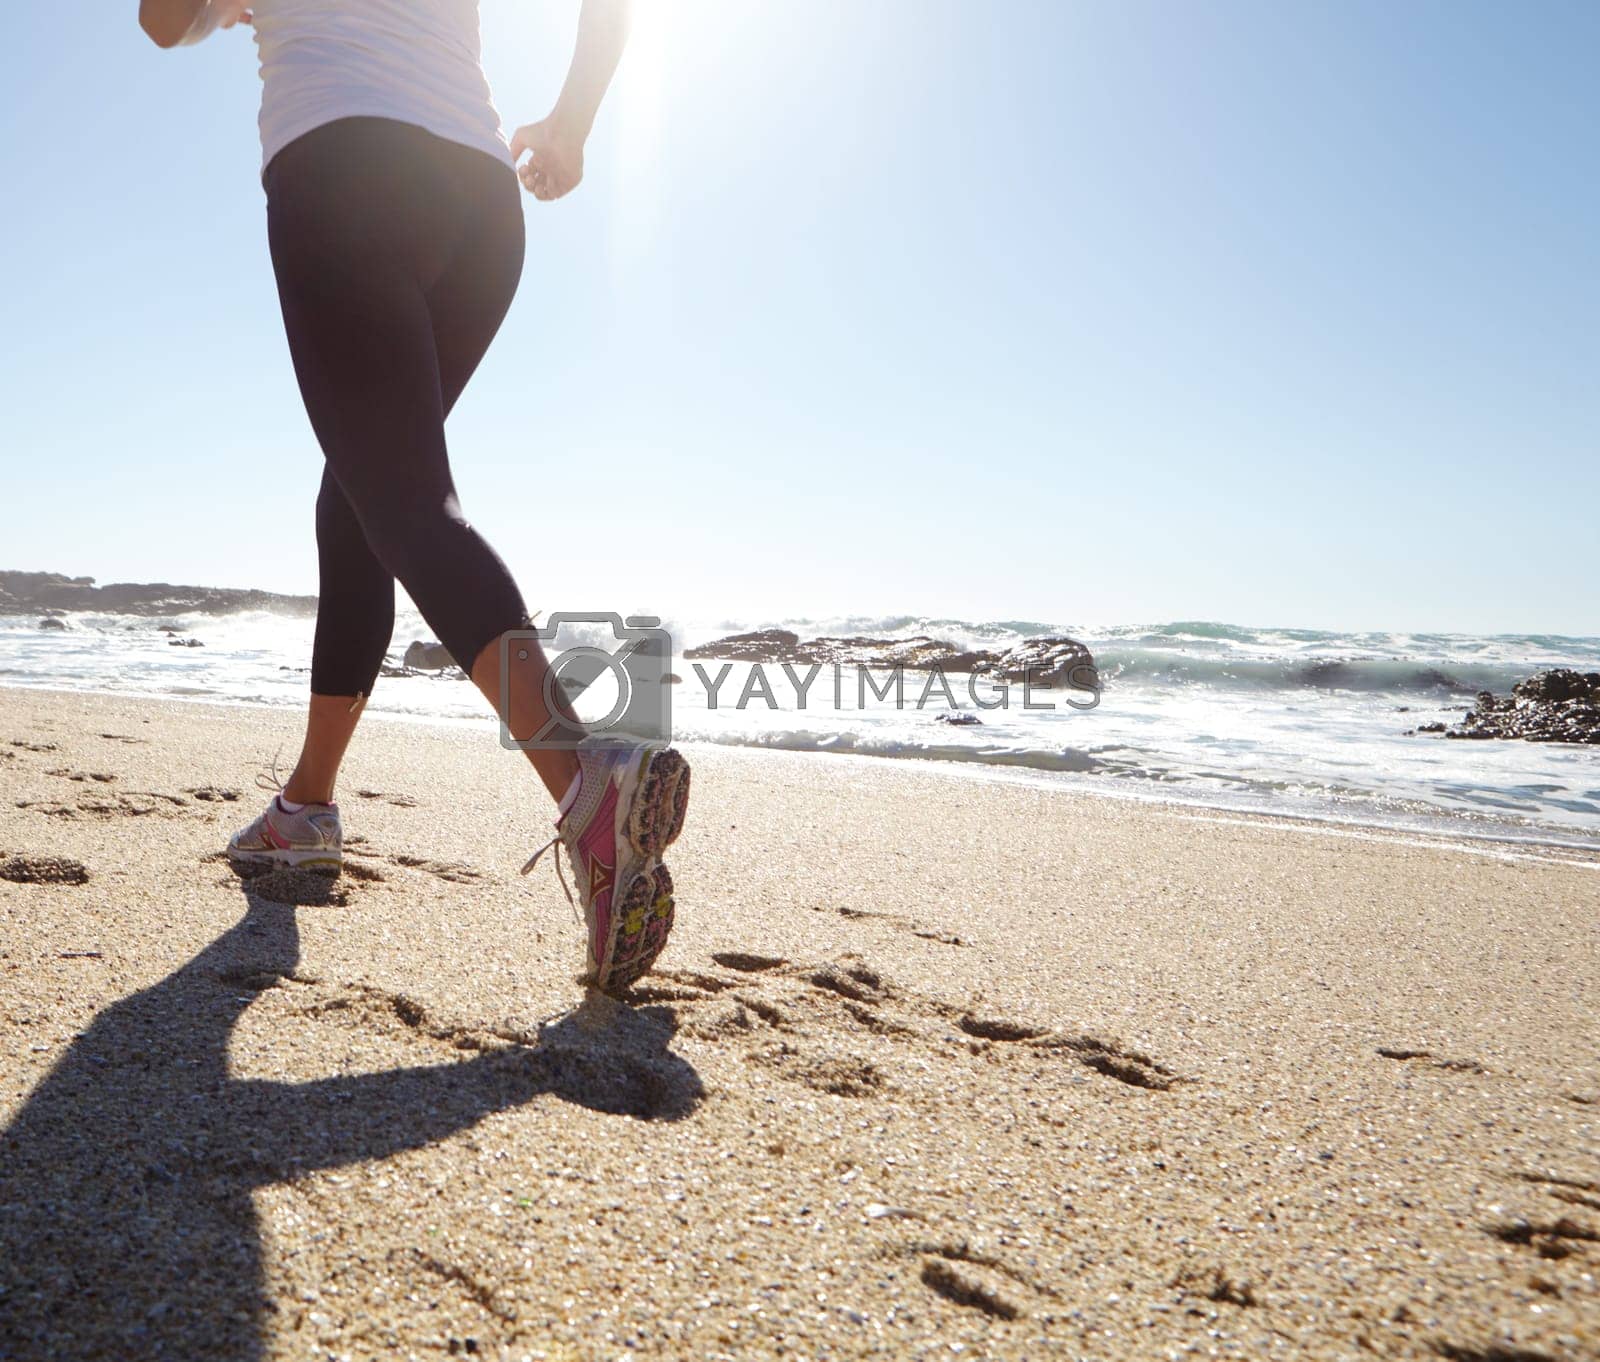 Royalty free image of Nature is her motivation. a young woman jogging on the beach. by YuriArcurs